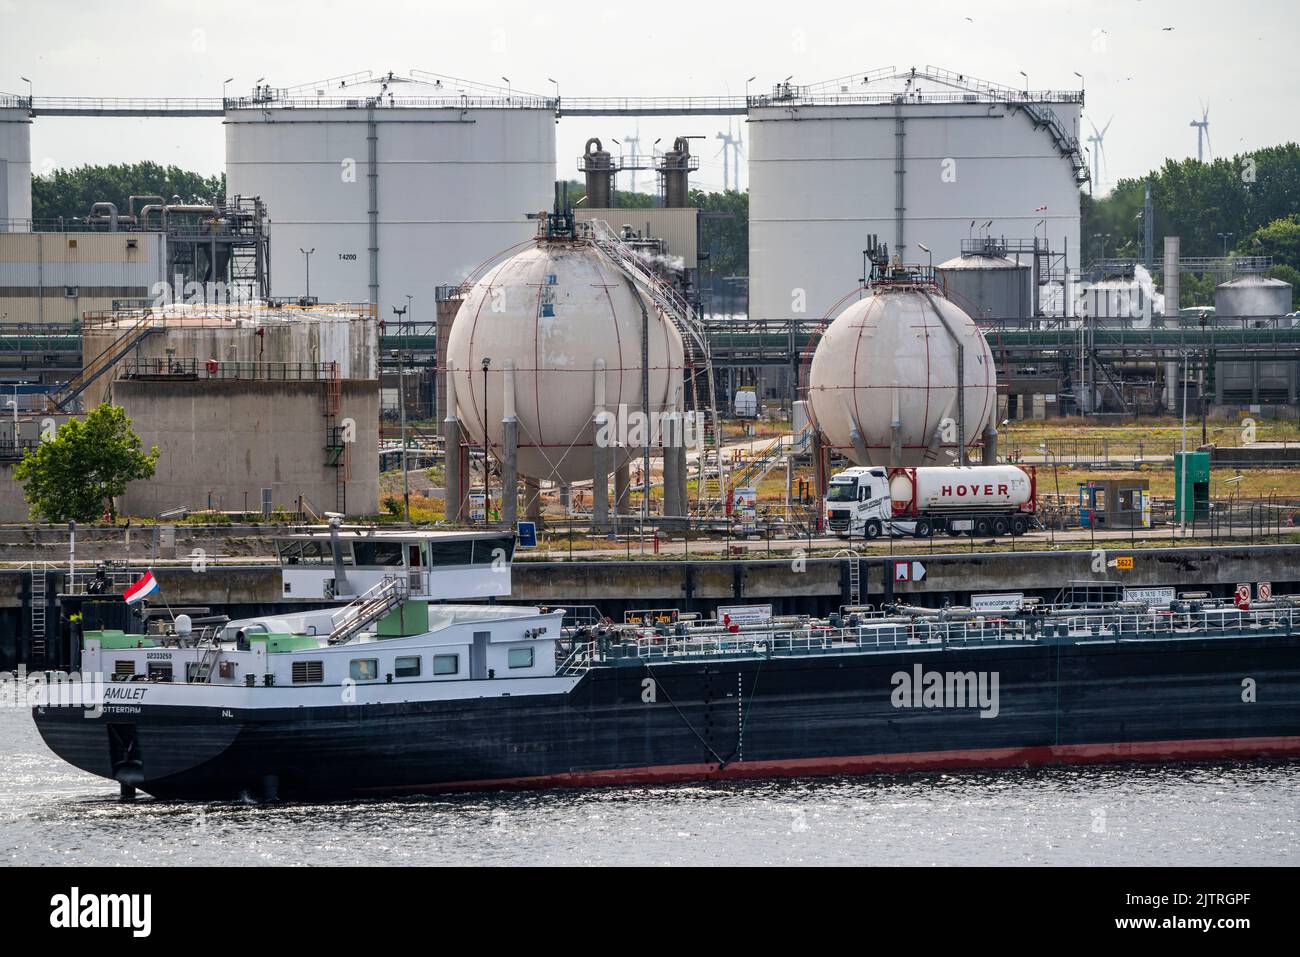 Petroleumhaven, Vopak Terminal Europoort, crude oil tank farm, over 99 large tanks, and 22 loading terminals for overseas and inland vessels, Europoor Stock Photo